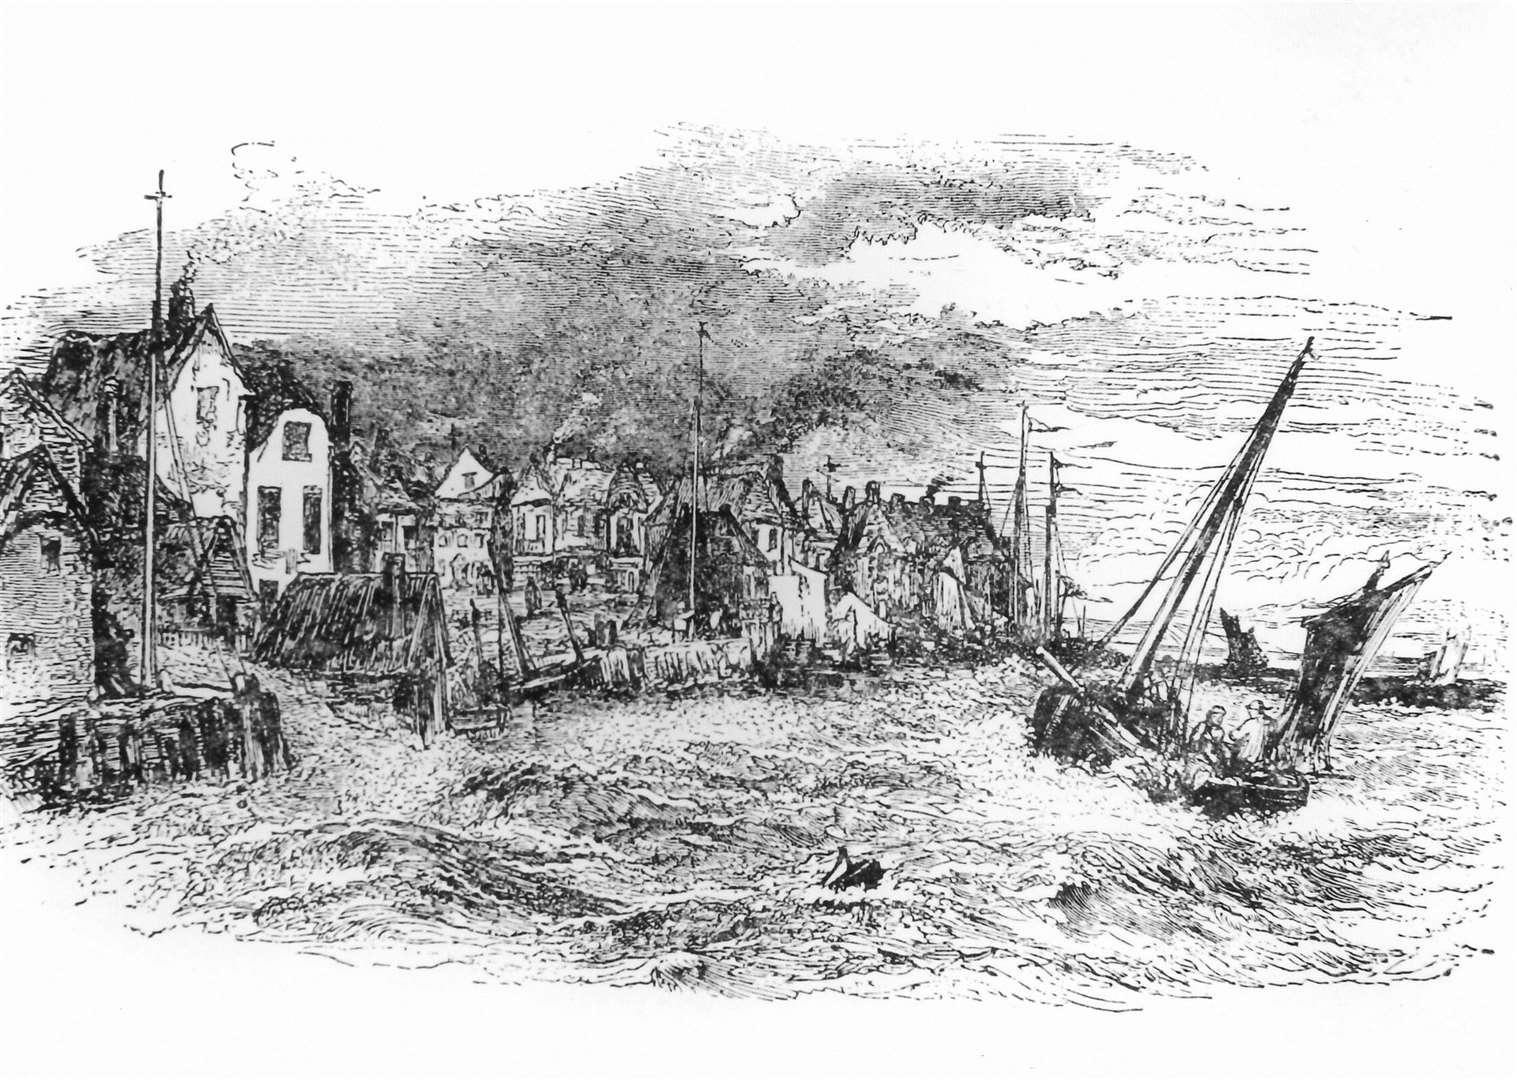 Smuggling was a major issue along the Kent coast